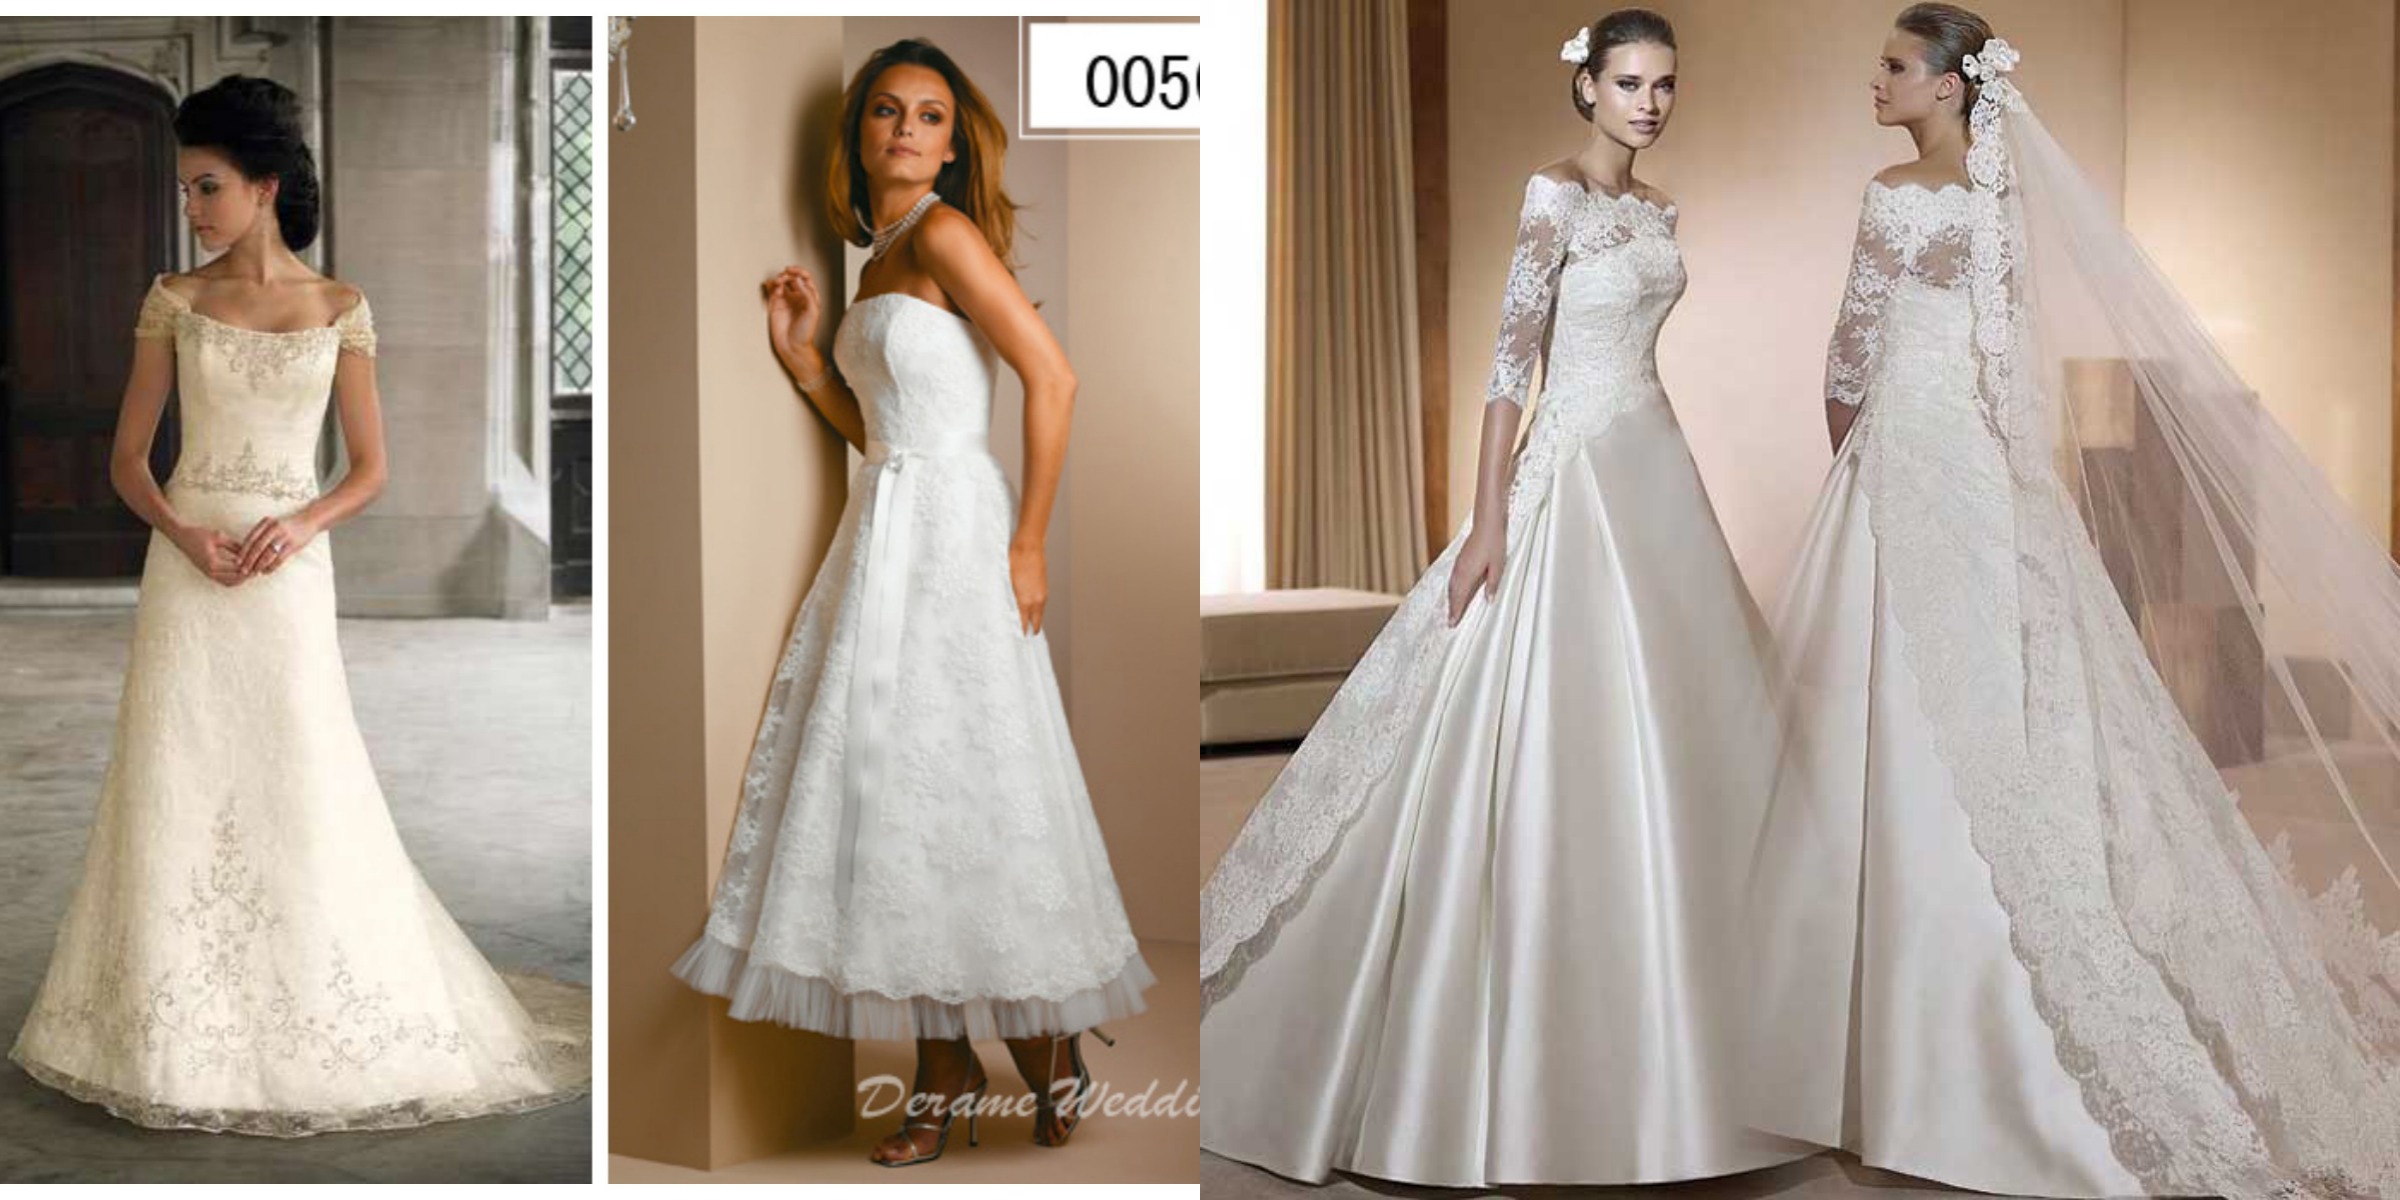 good gowns for ladies